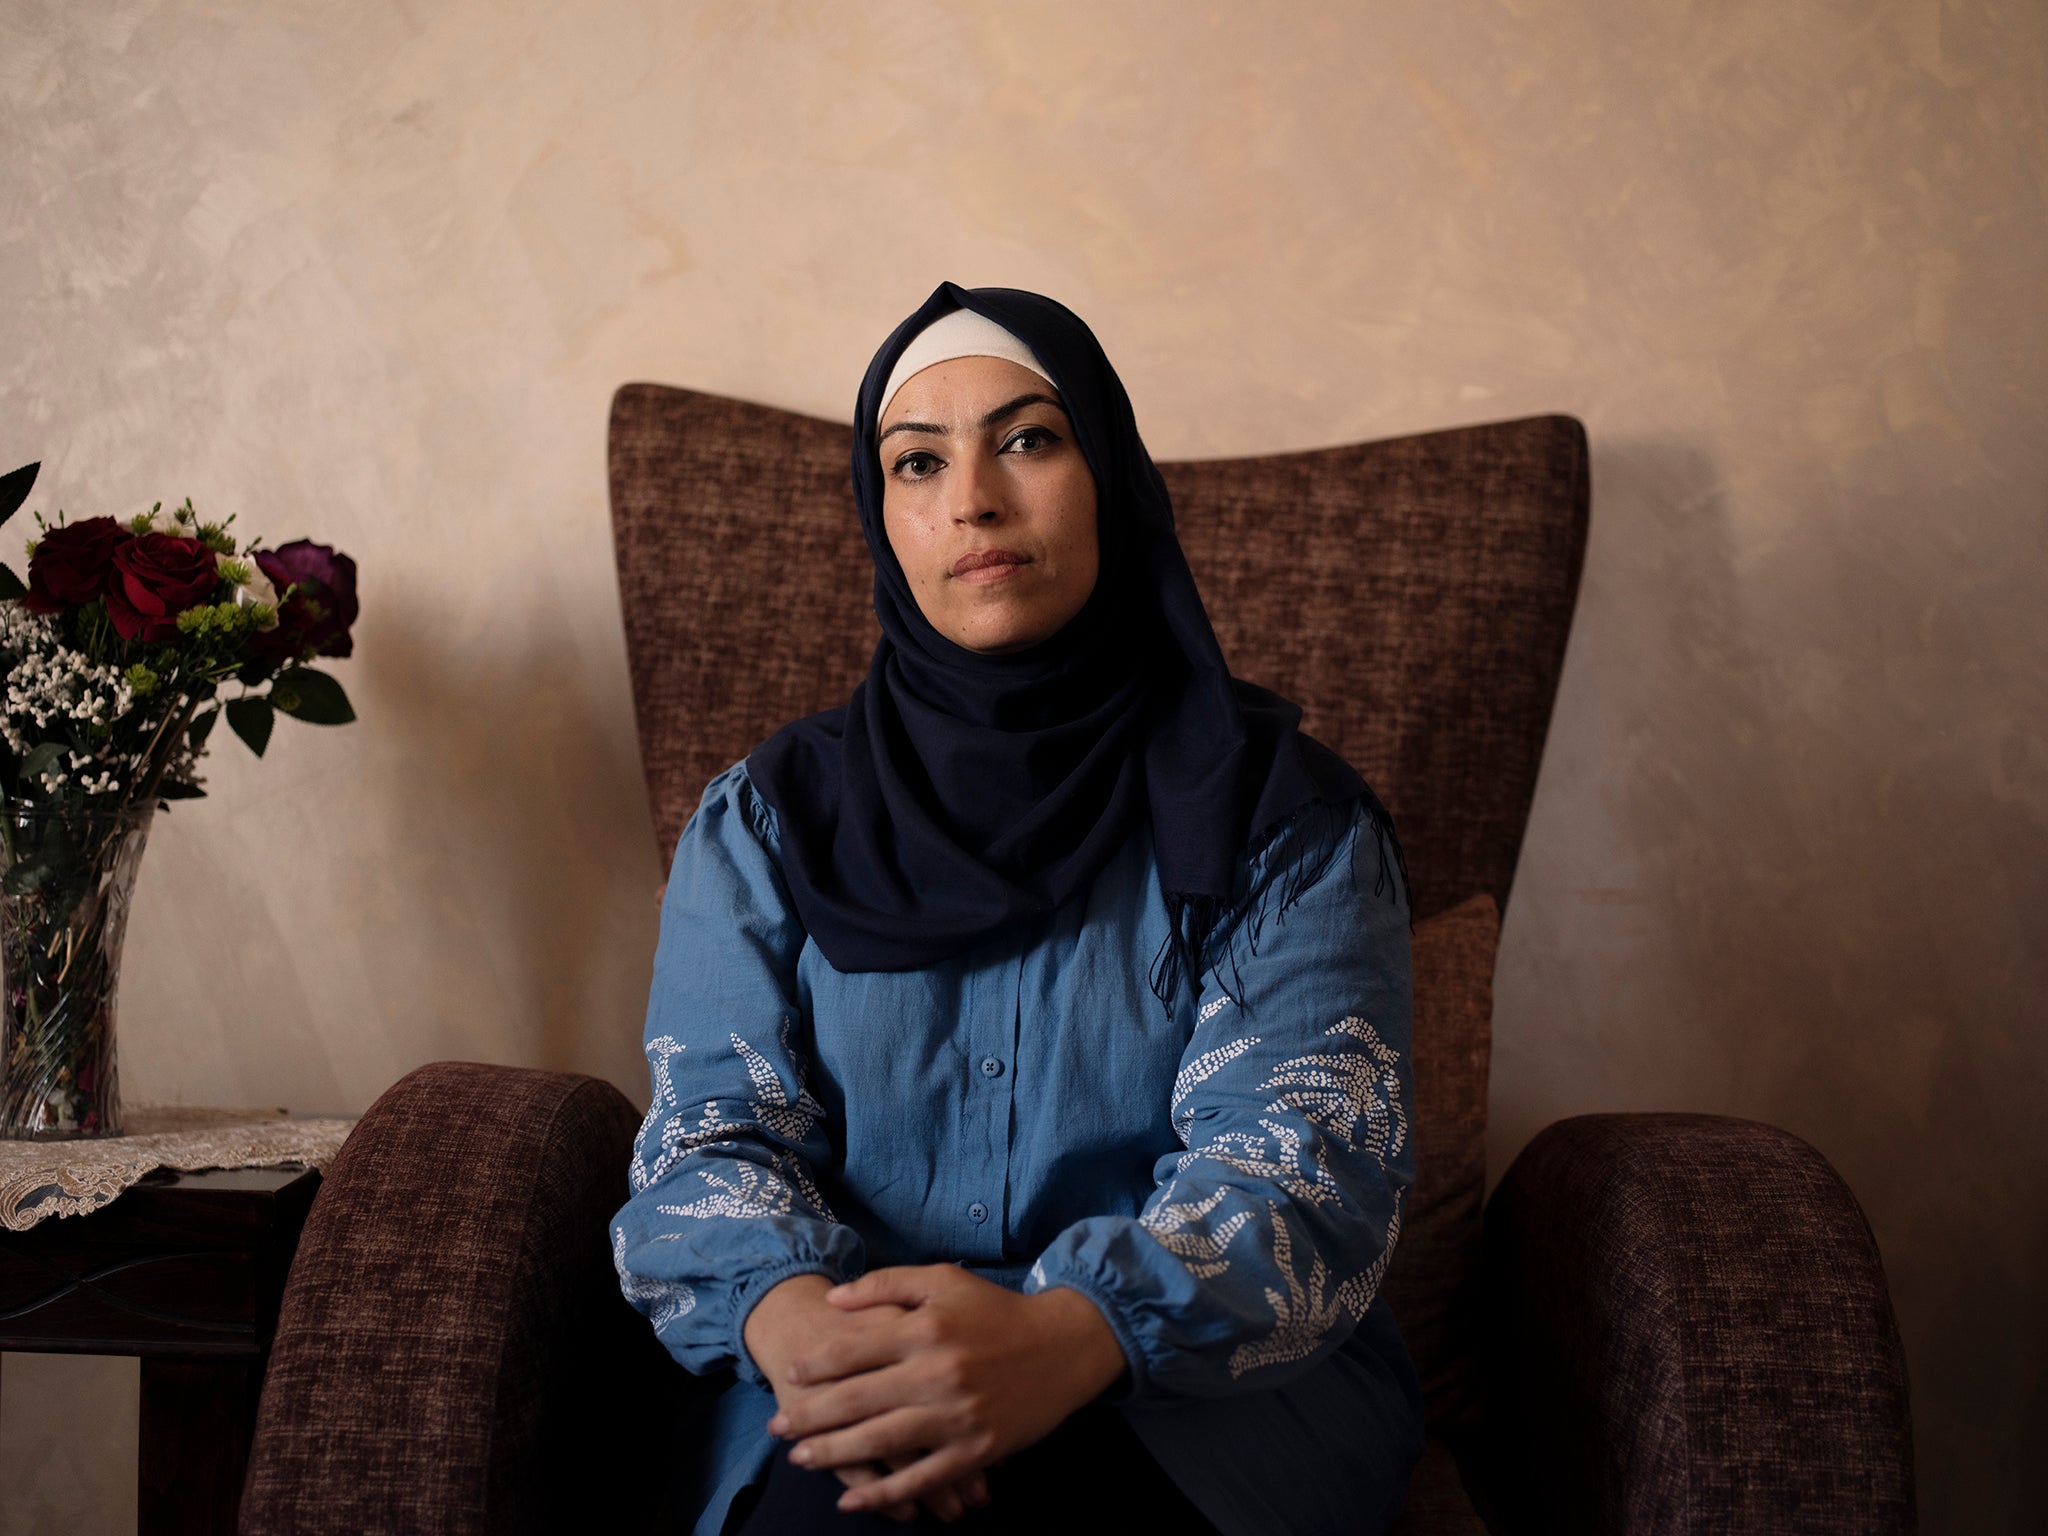 Hiba Balawi, 32, says she was exploited in the private sector ‘but my husband gave me the strength to leave and develop myself and my career’